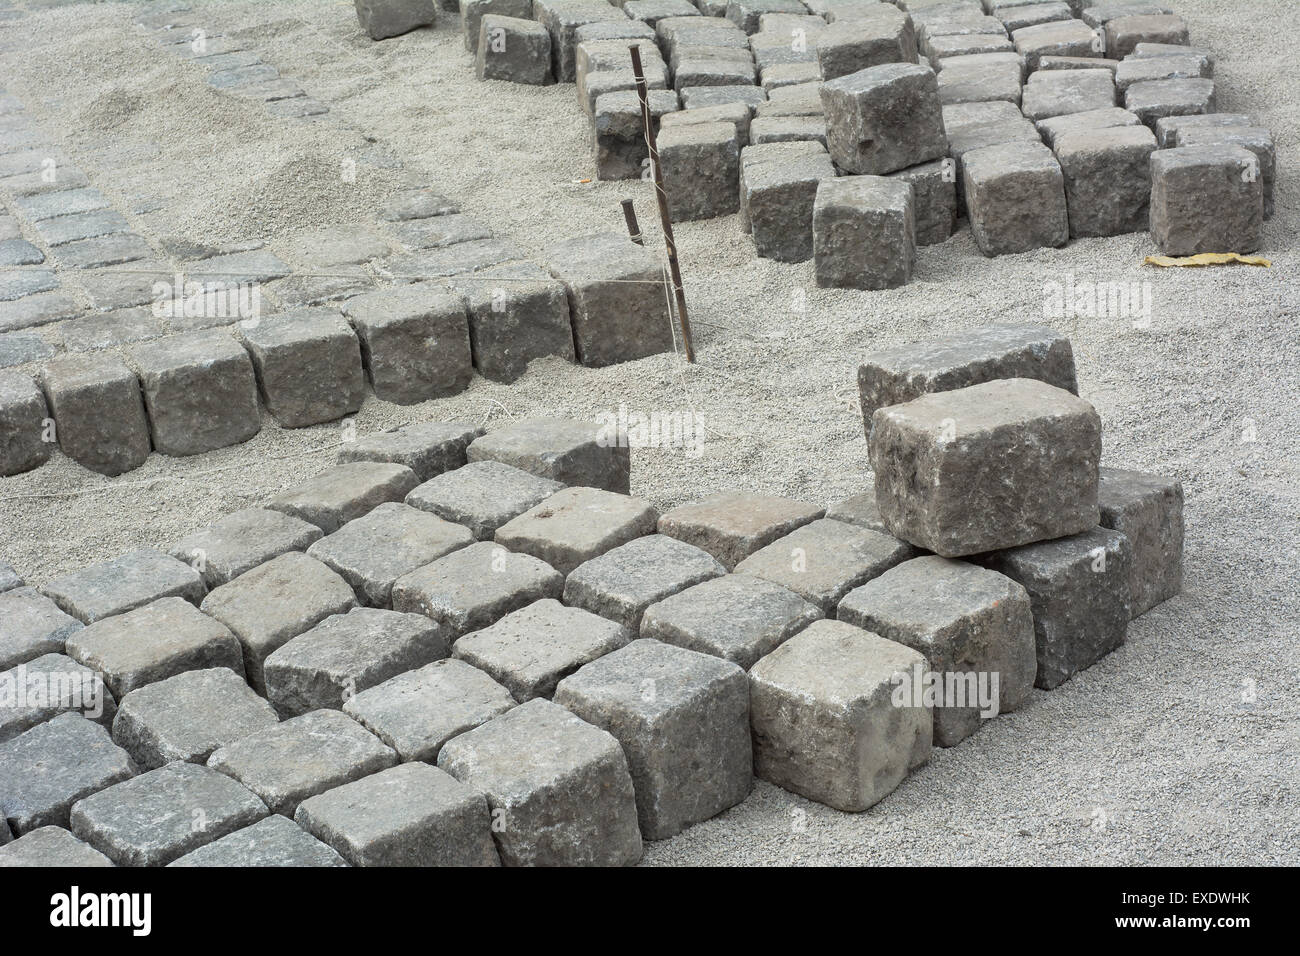 Road Construction Site with Cobblestone and Gravel Stock Photo